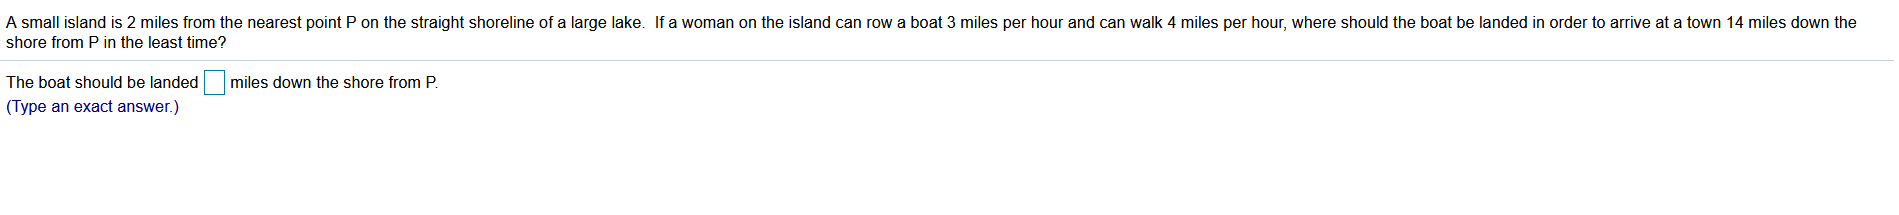 A small island is 2 miles from the nearest point P on the straight shoreline of a large lake. If a woman on the island can row a boat 3 miles per hour and can walk 4 miles per hour, where should the boat be landed in order to arrive at a town 14 miles down the
shore from P in the least time?
